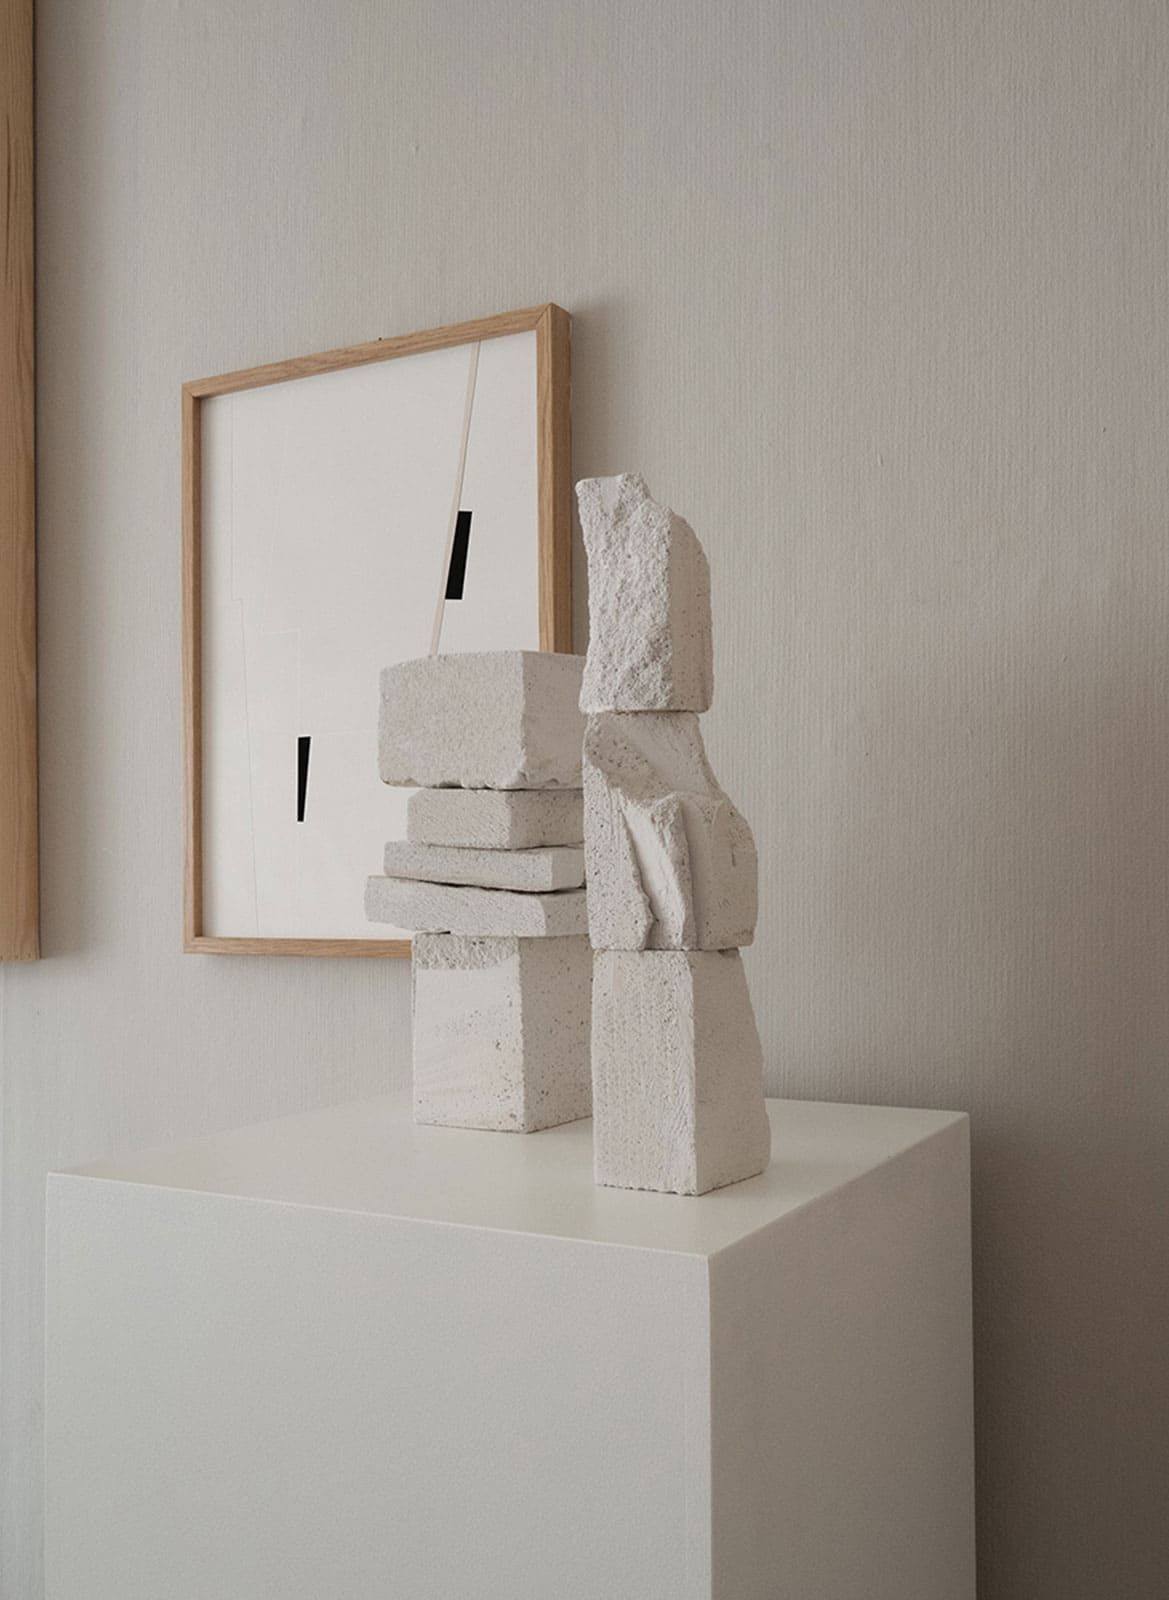  2 sculptures and a framed art piece hanging behind it by atelier cph